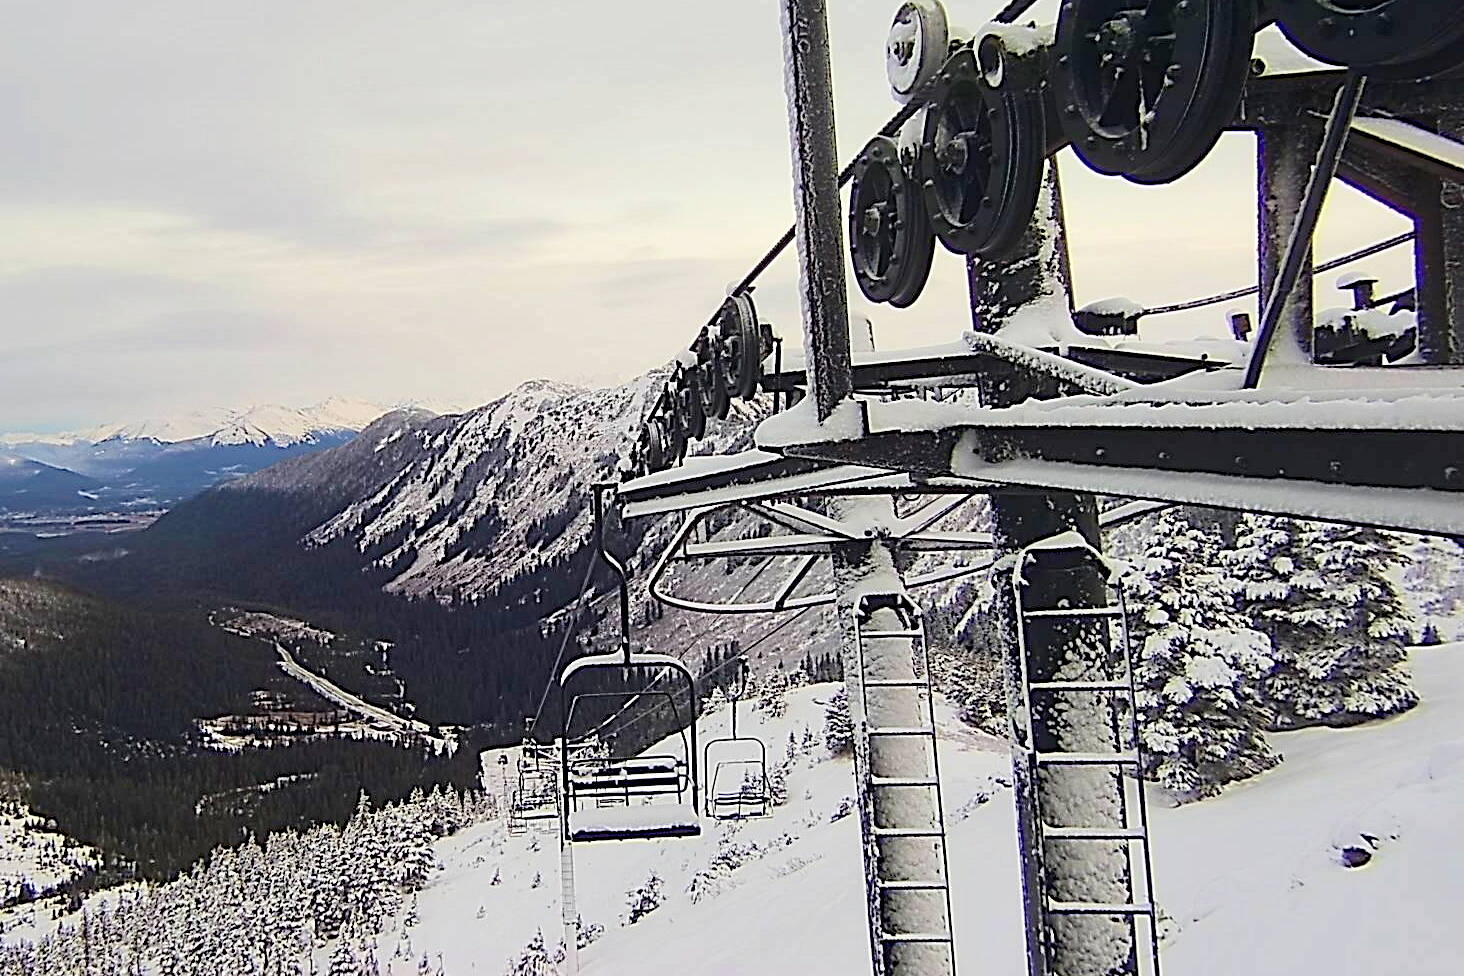 Fresh snow covers the surface of Eaglecrest Ski Area on Friday morning. General Manager Dave Scanlan said Thursday the plan is to open the ski area next Saturday. (Webcam photo courtesy of Eaglecrest Ski Area)